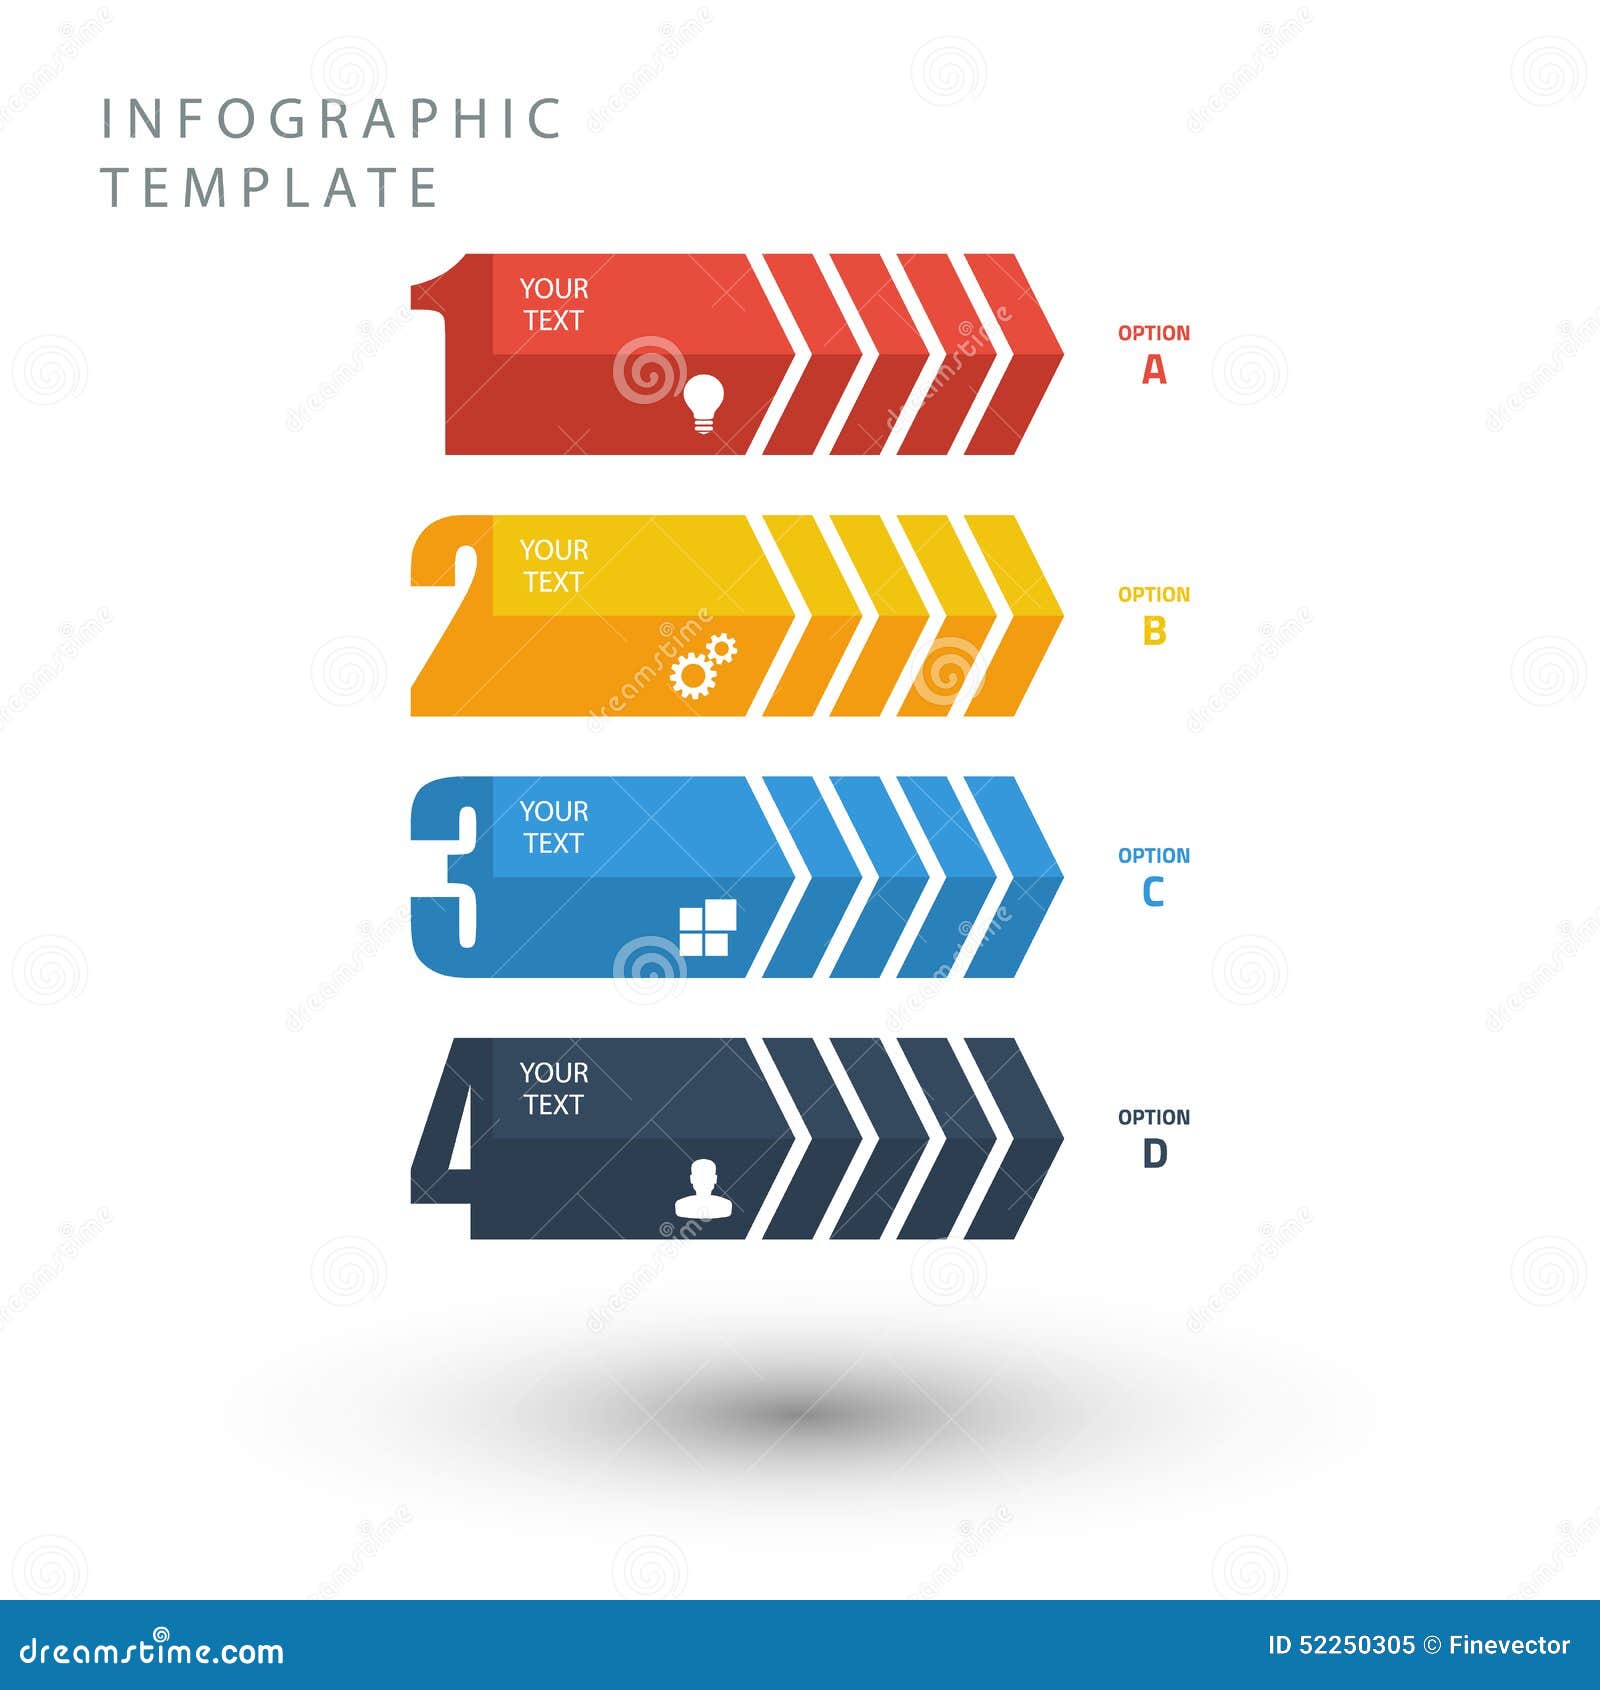 info graphic template in flat colors on white background.